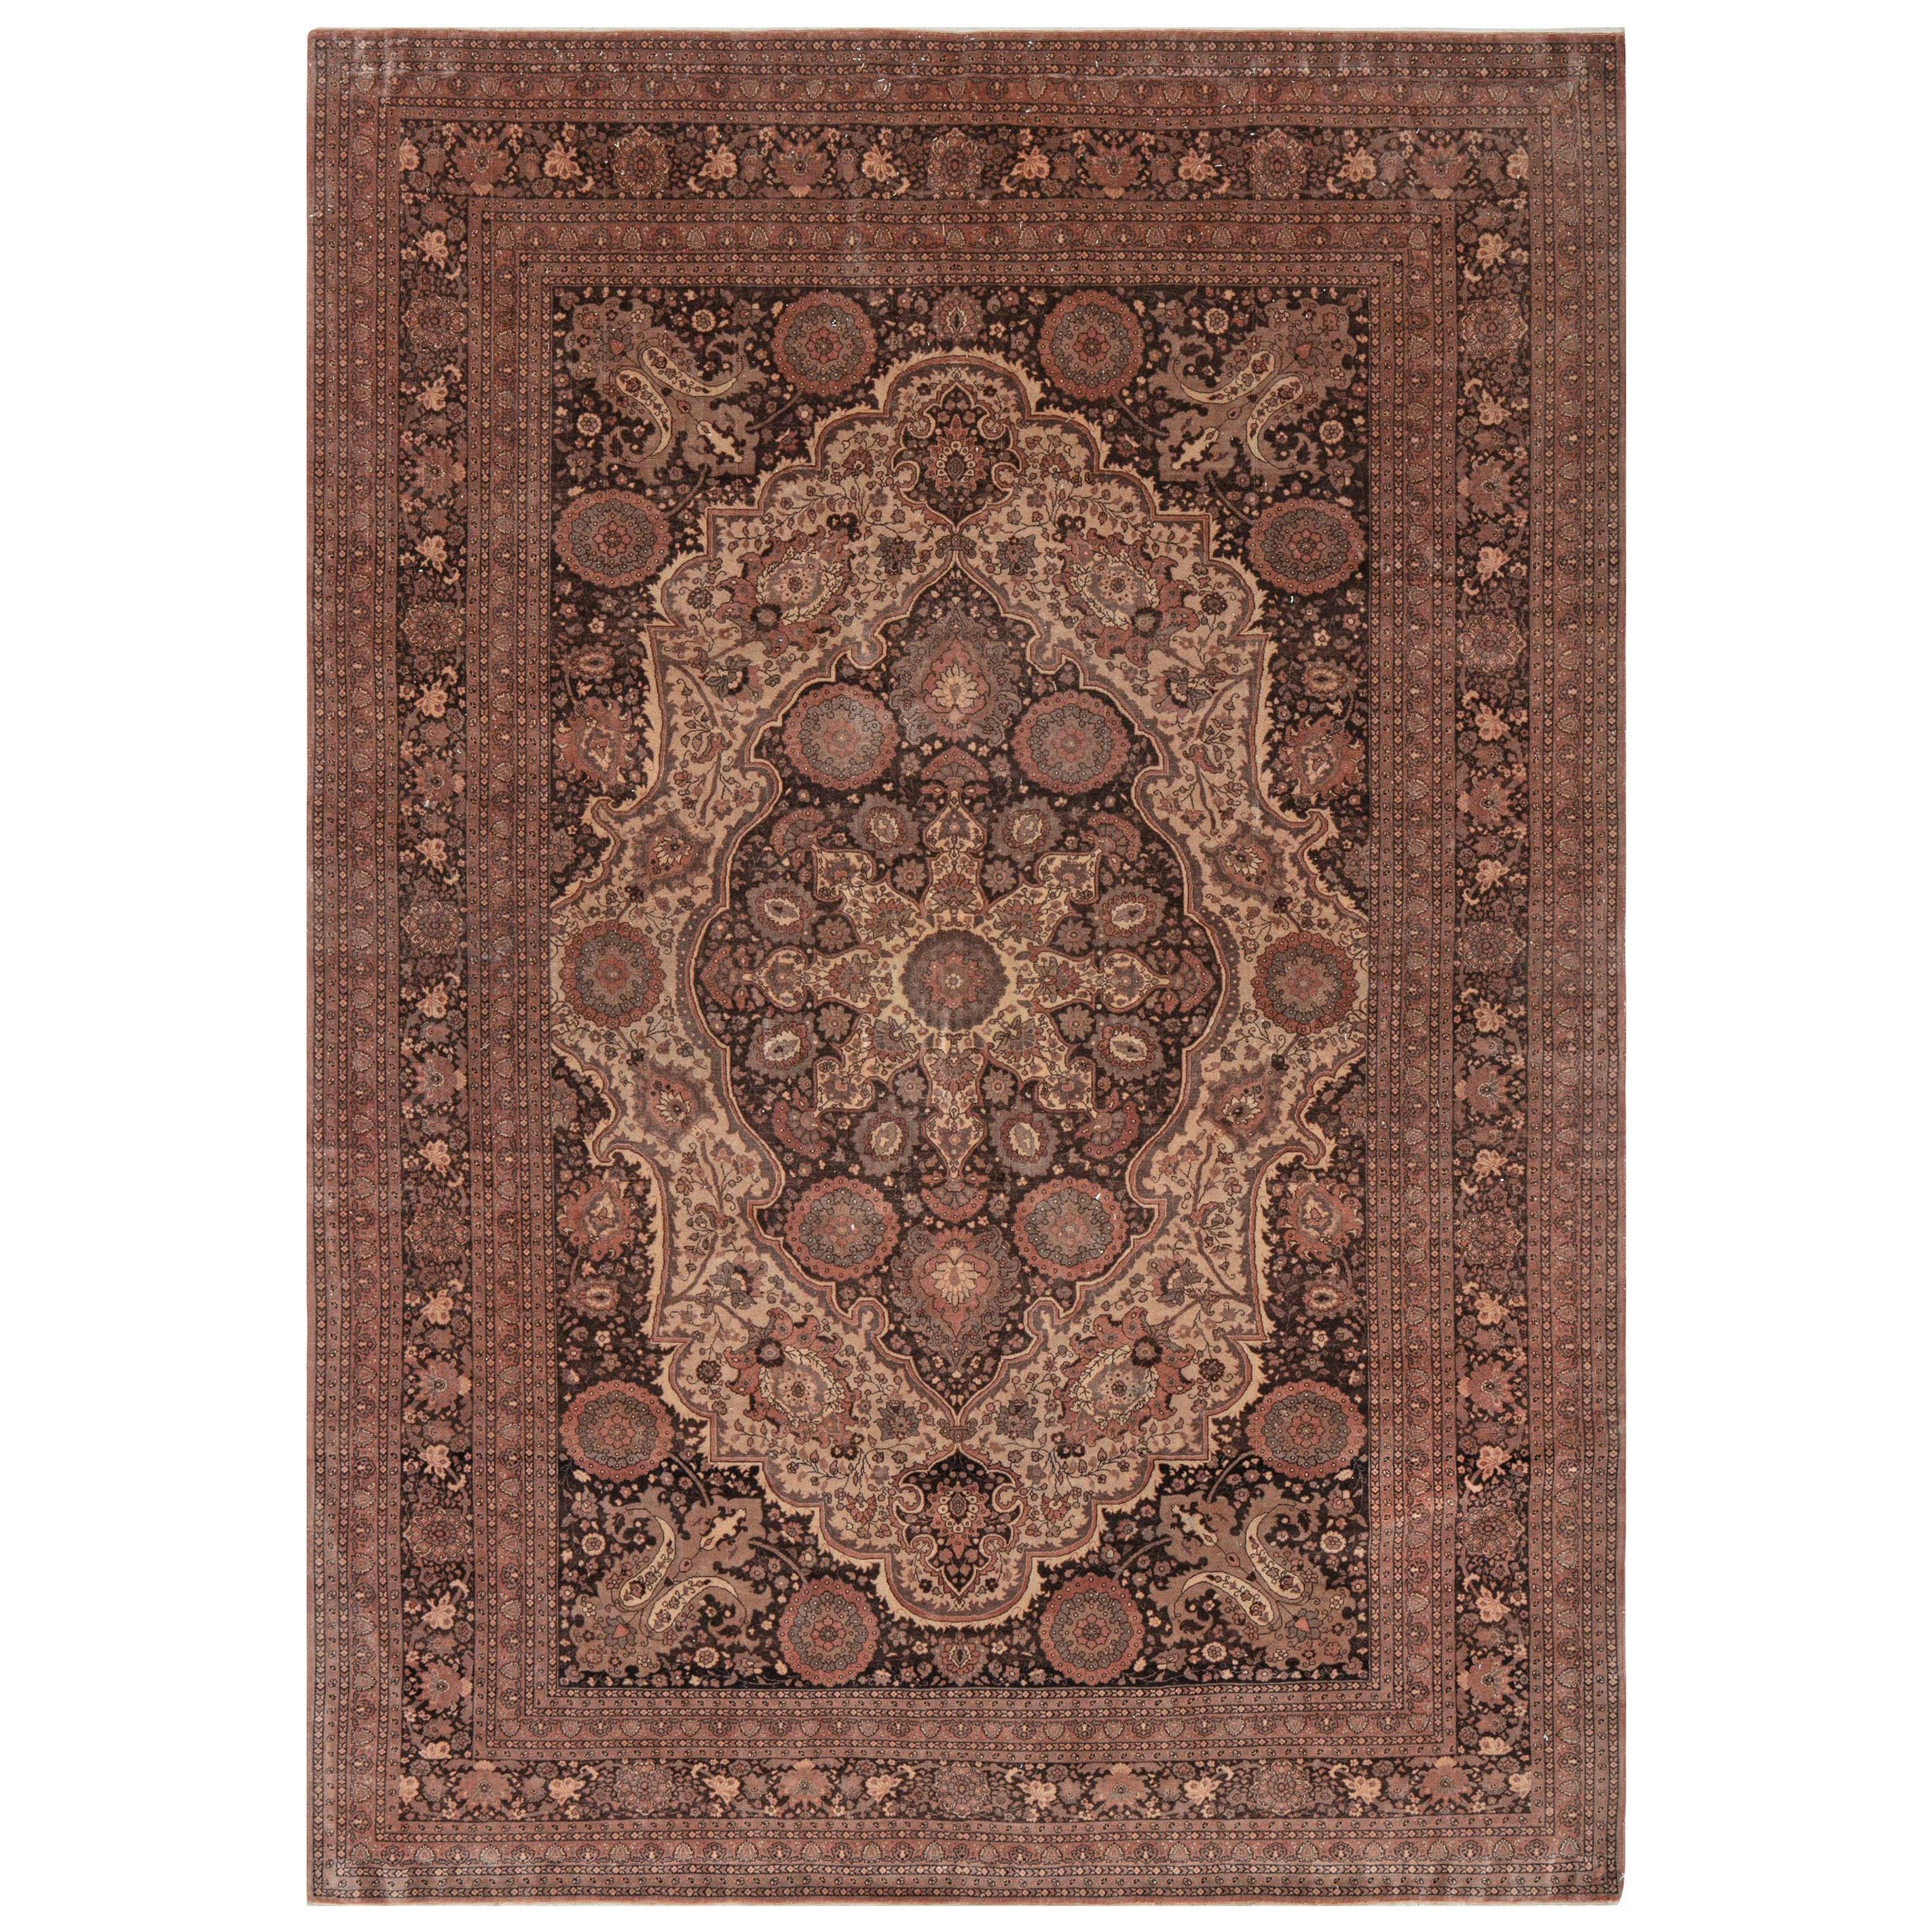 Antique Persian Tabriz Hand-Knotted Wool Rug